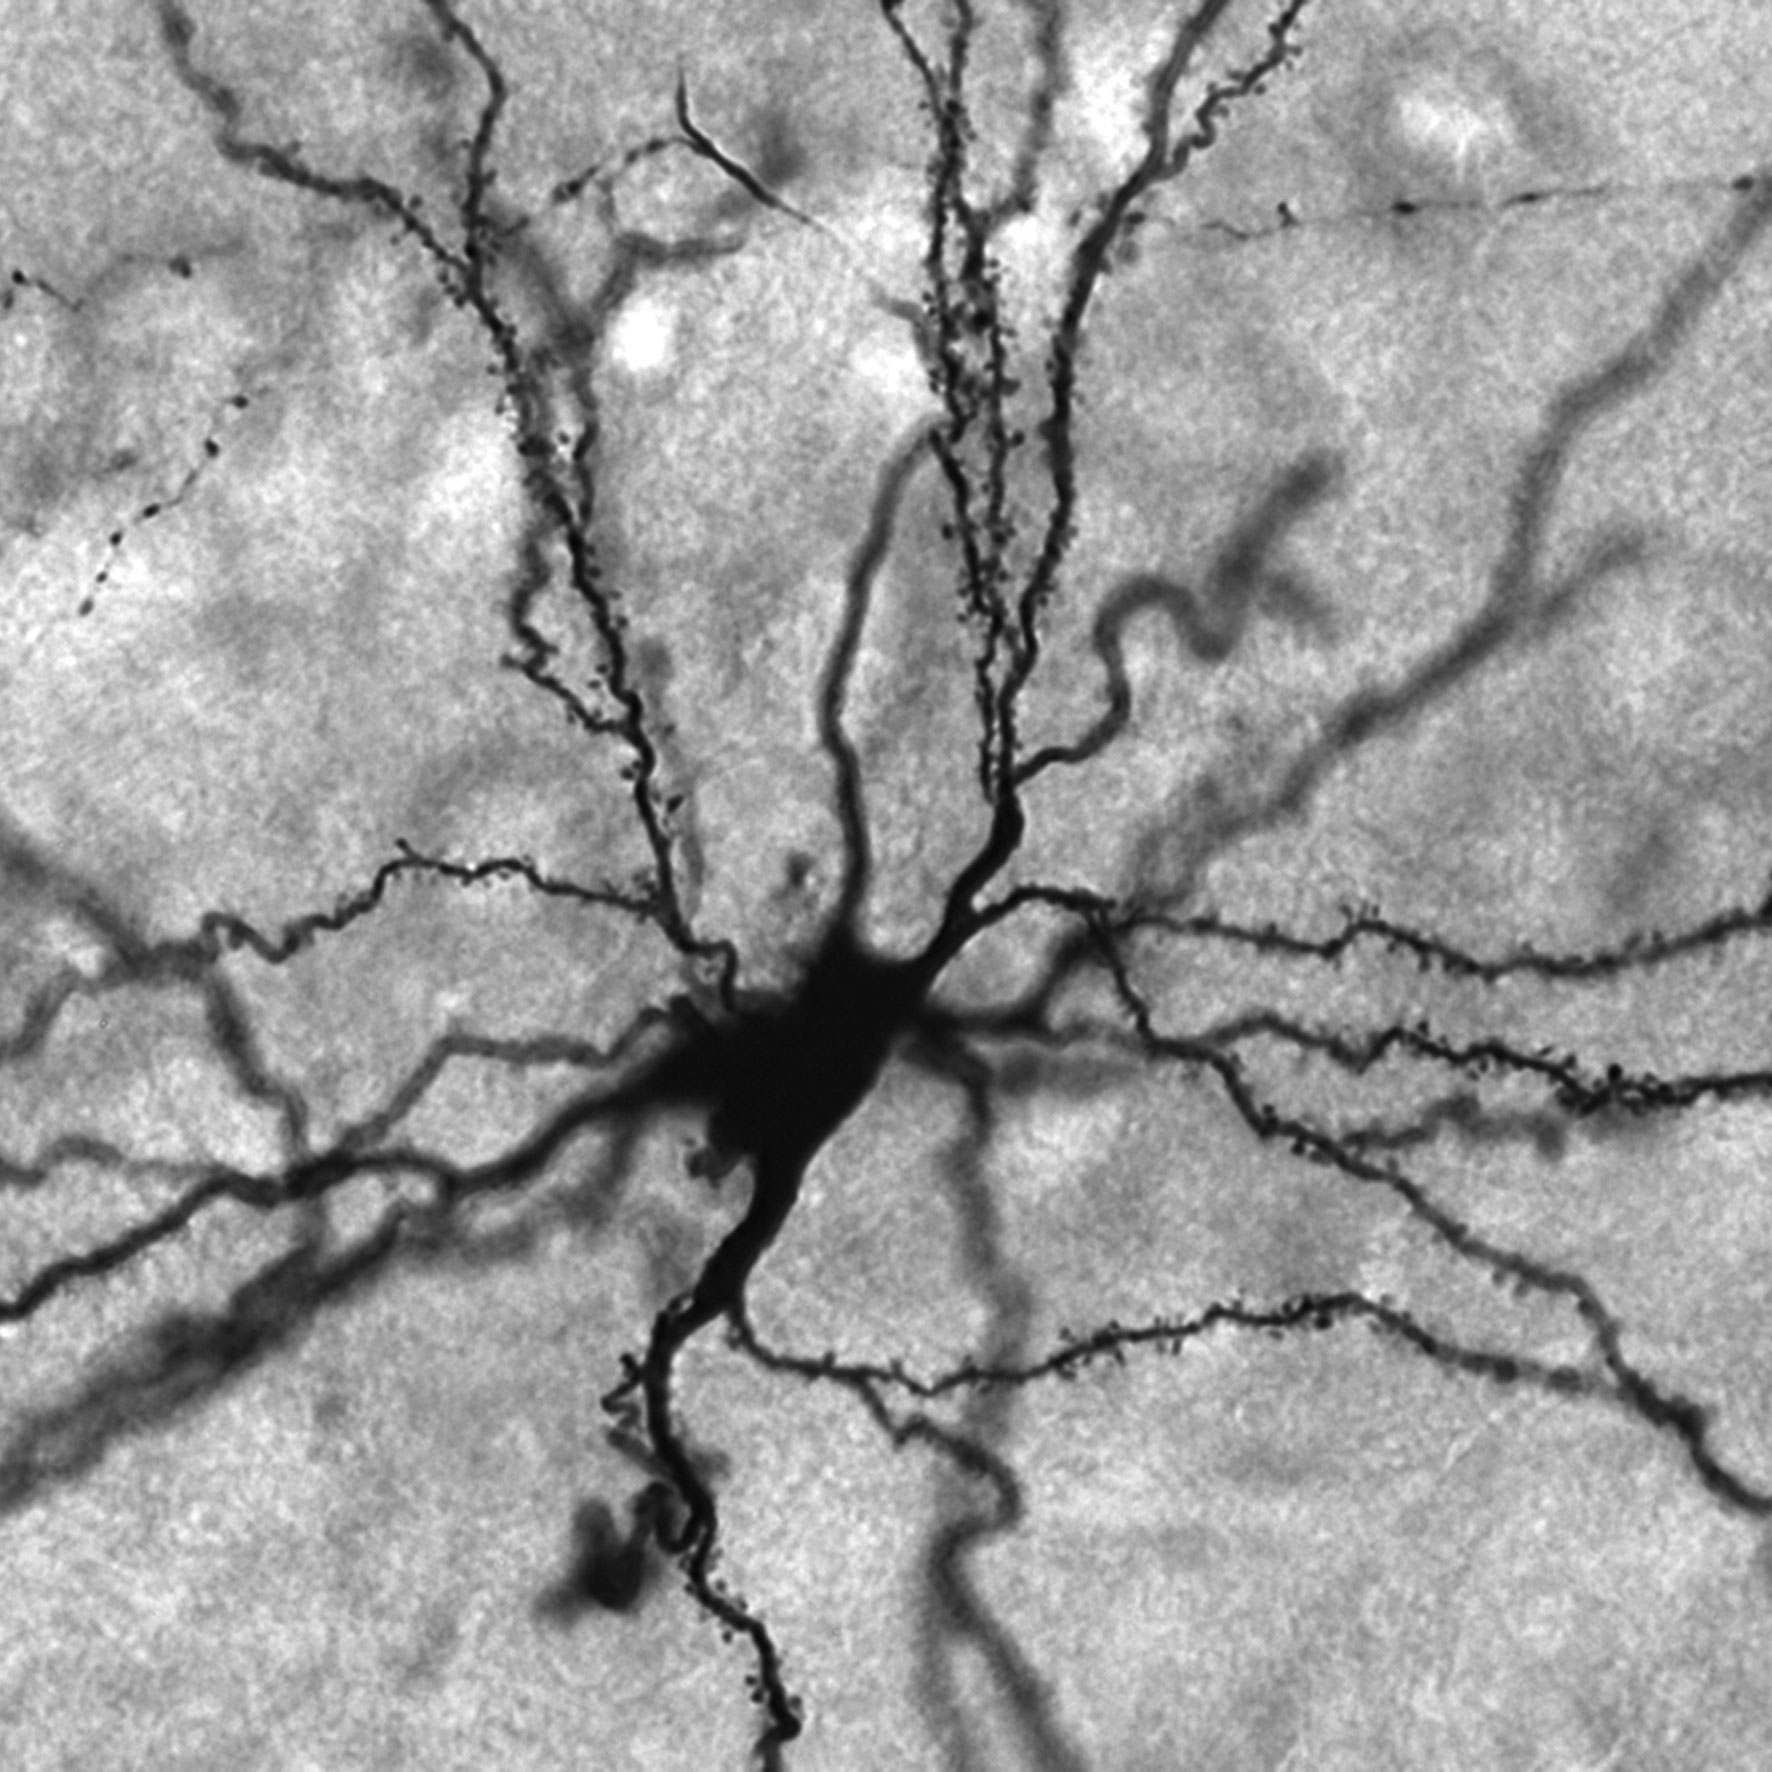 black and white image of neuron found in the amygdala with numerous projections